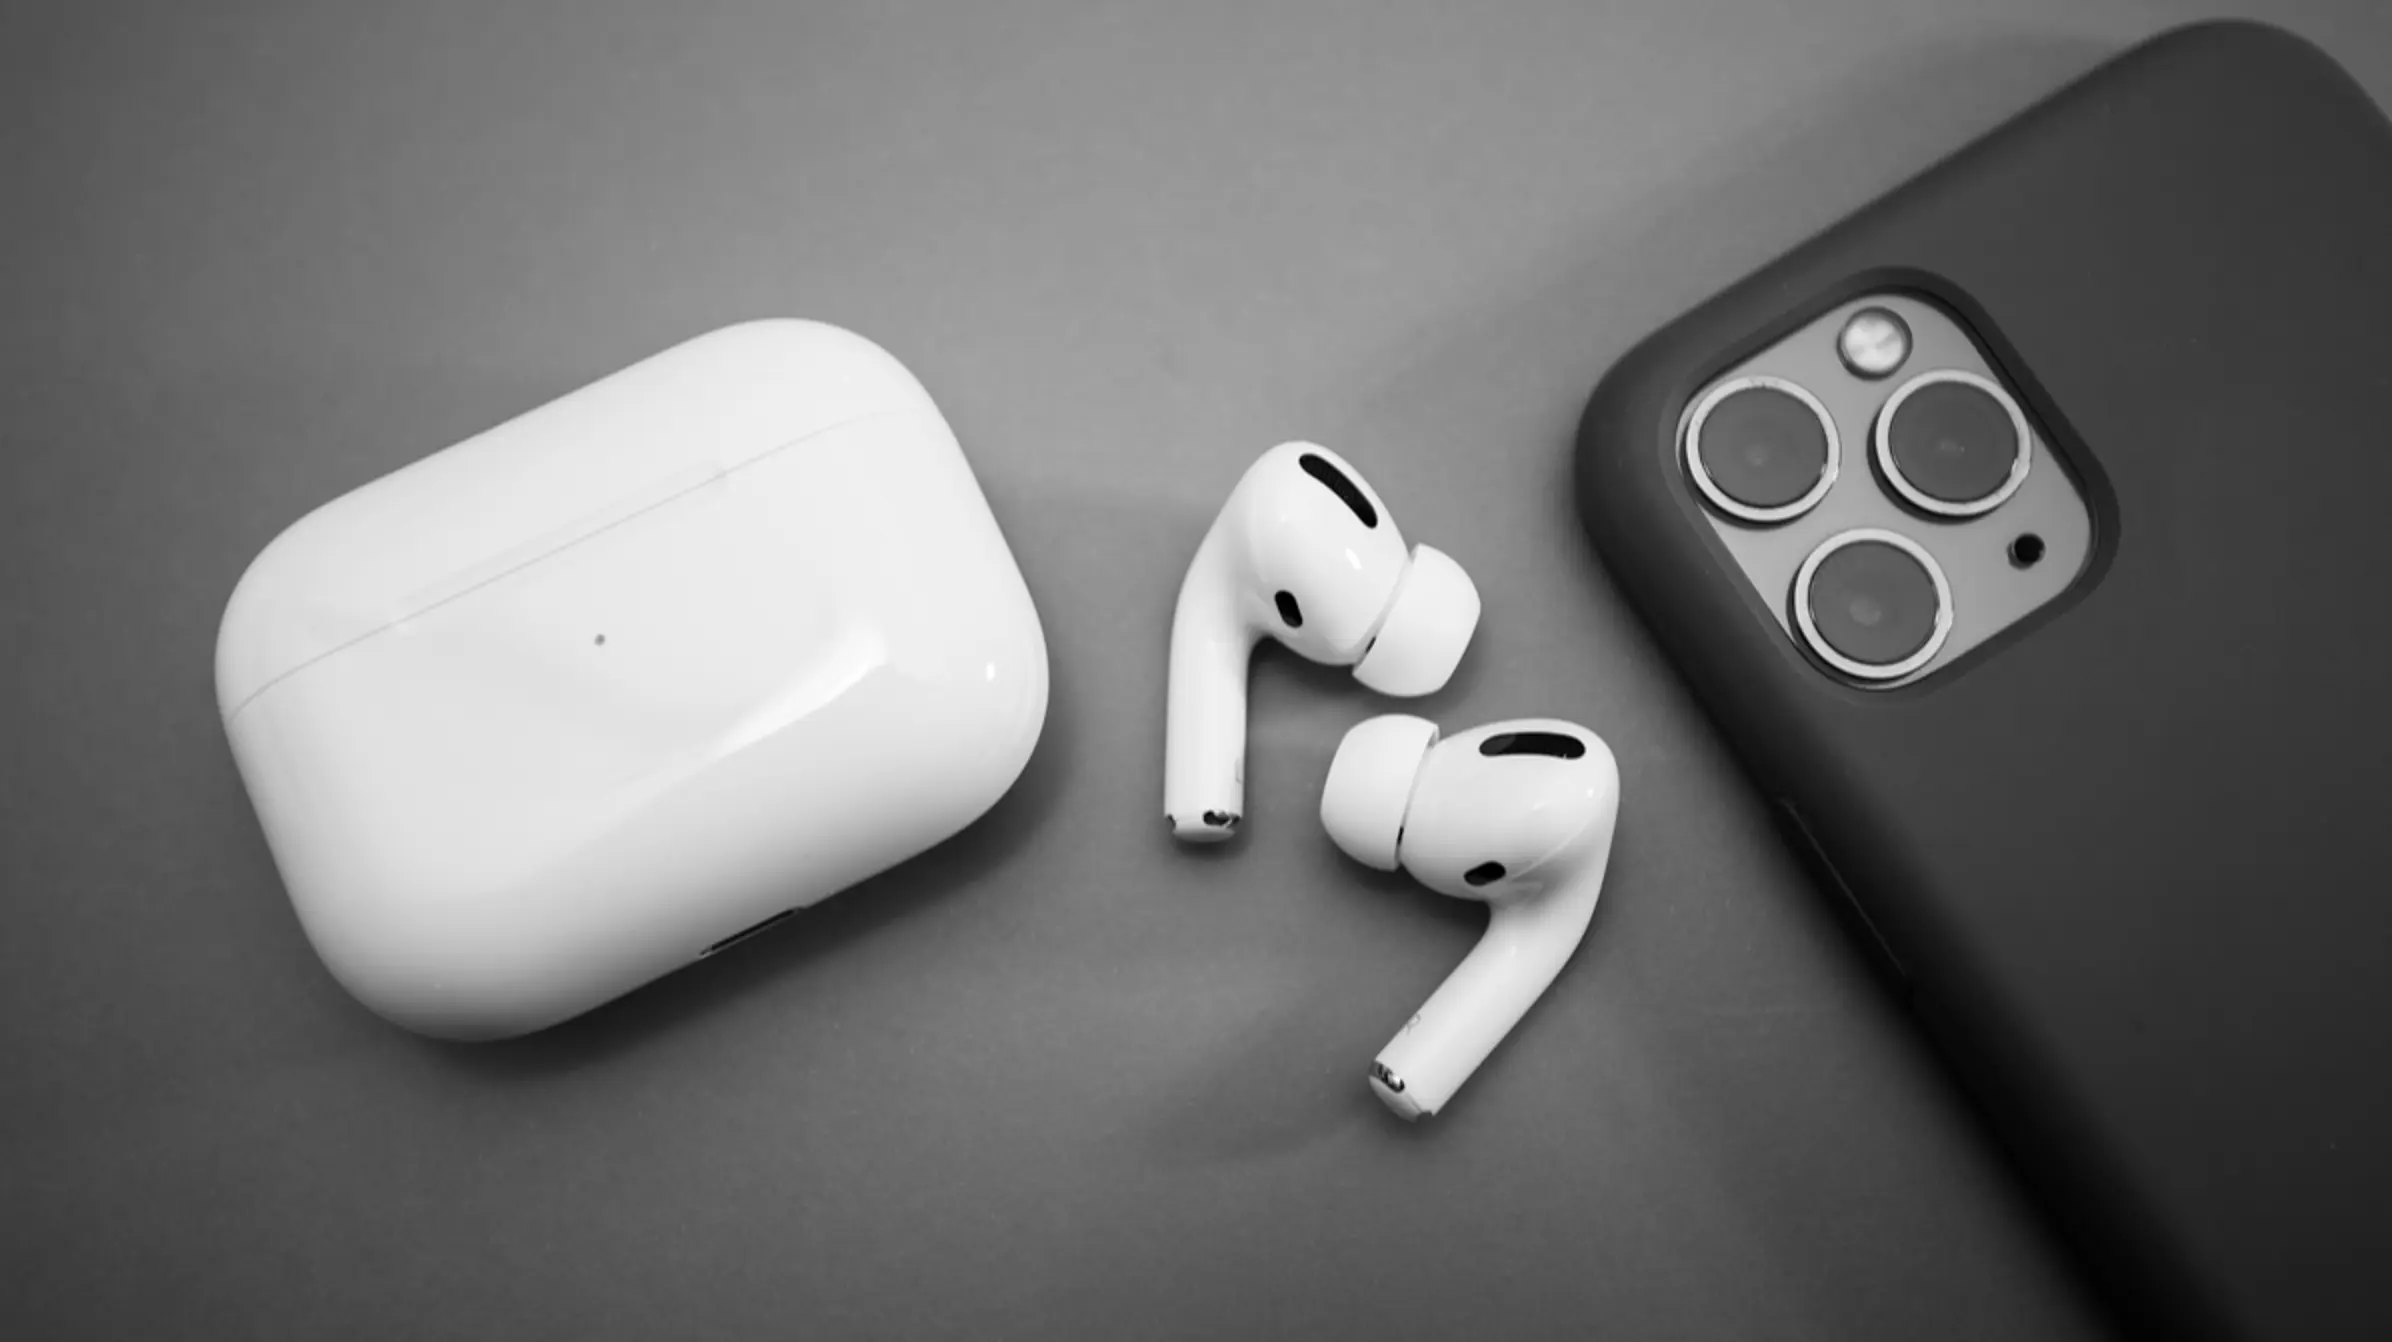 The 5 Best Wireless Earbuds For iPhone Of 2022 [Buyer’s Guide ]